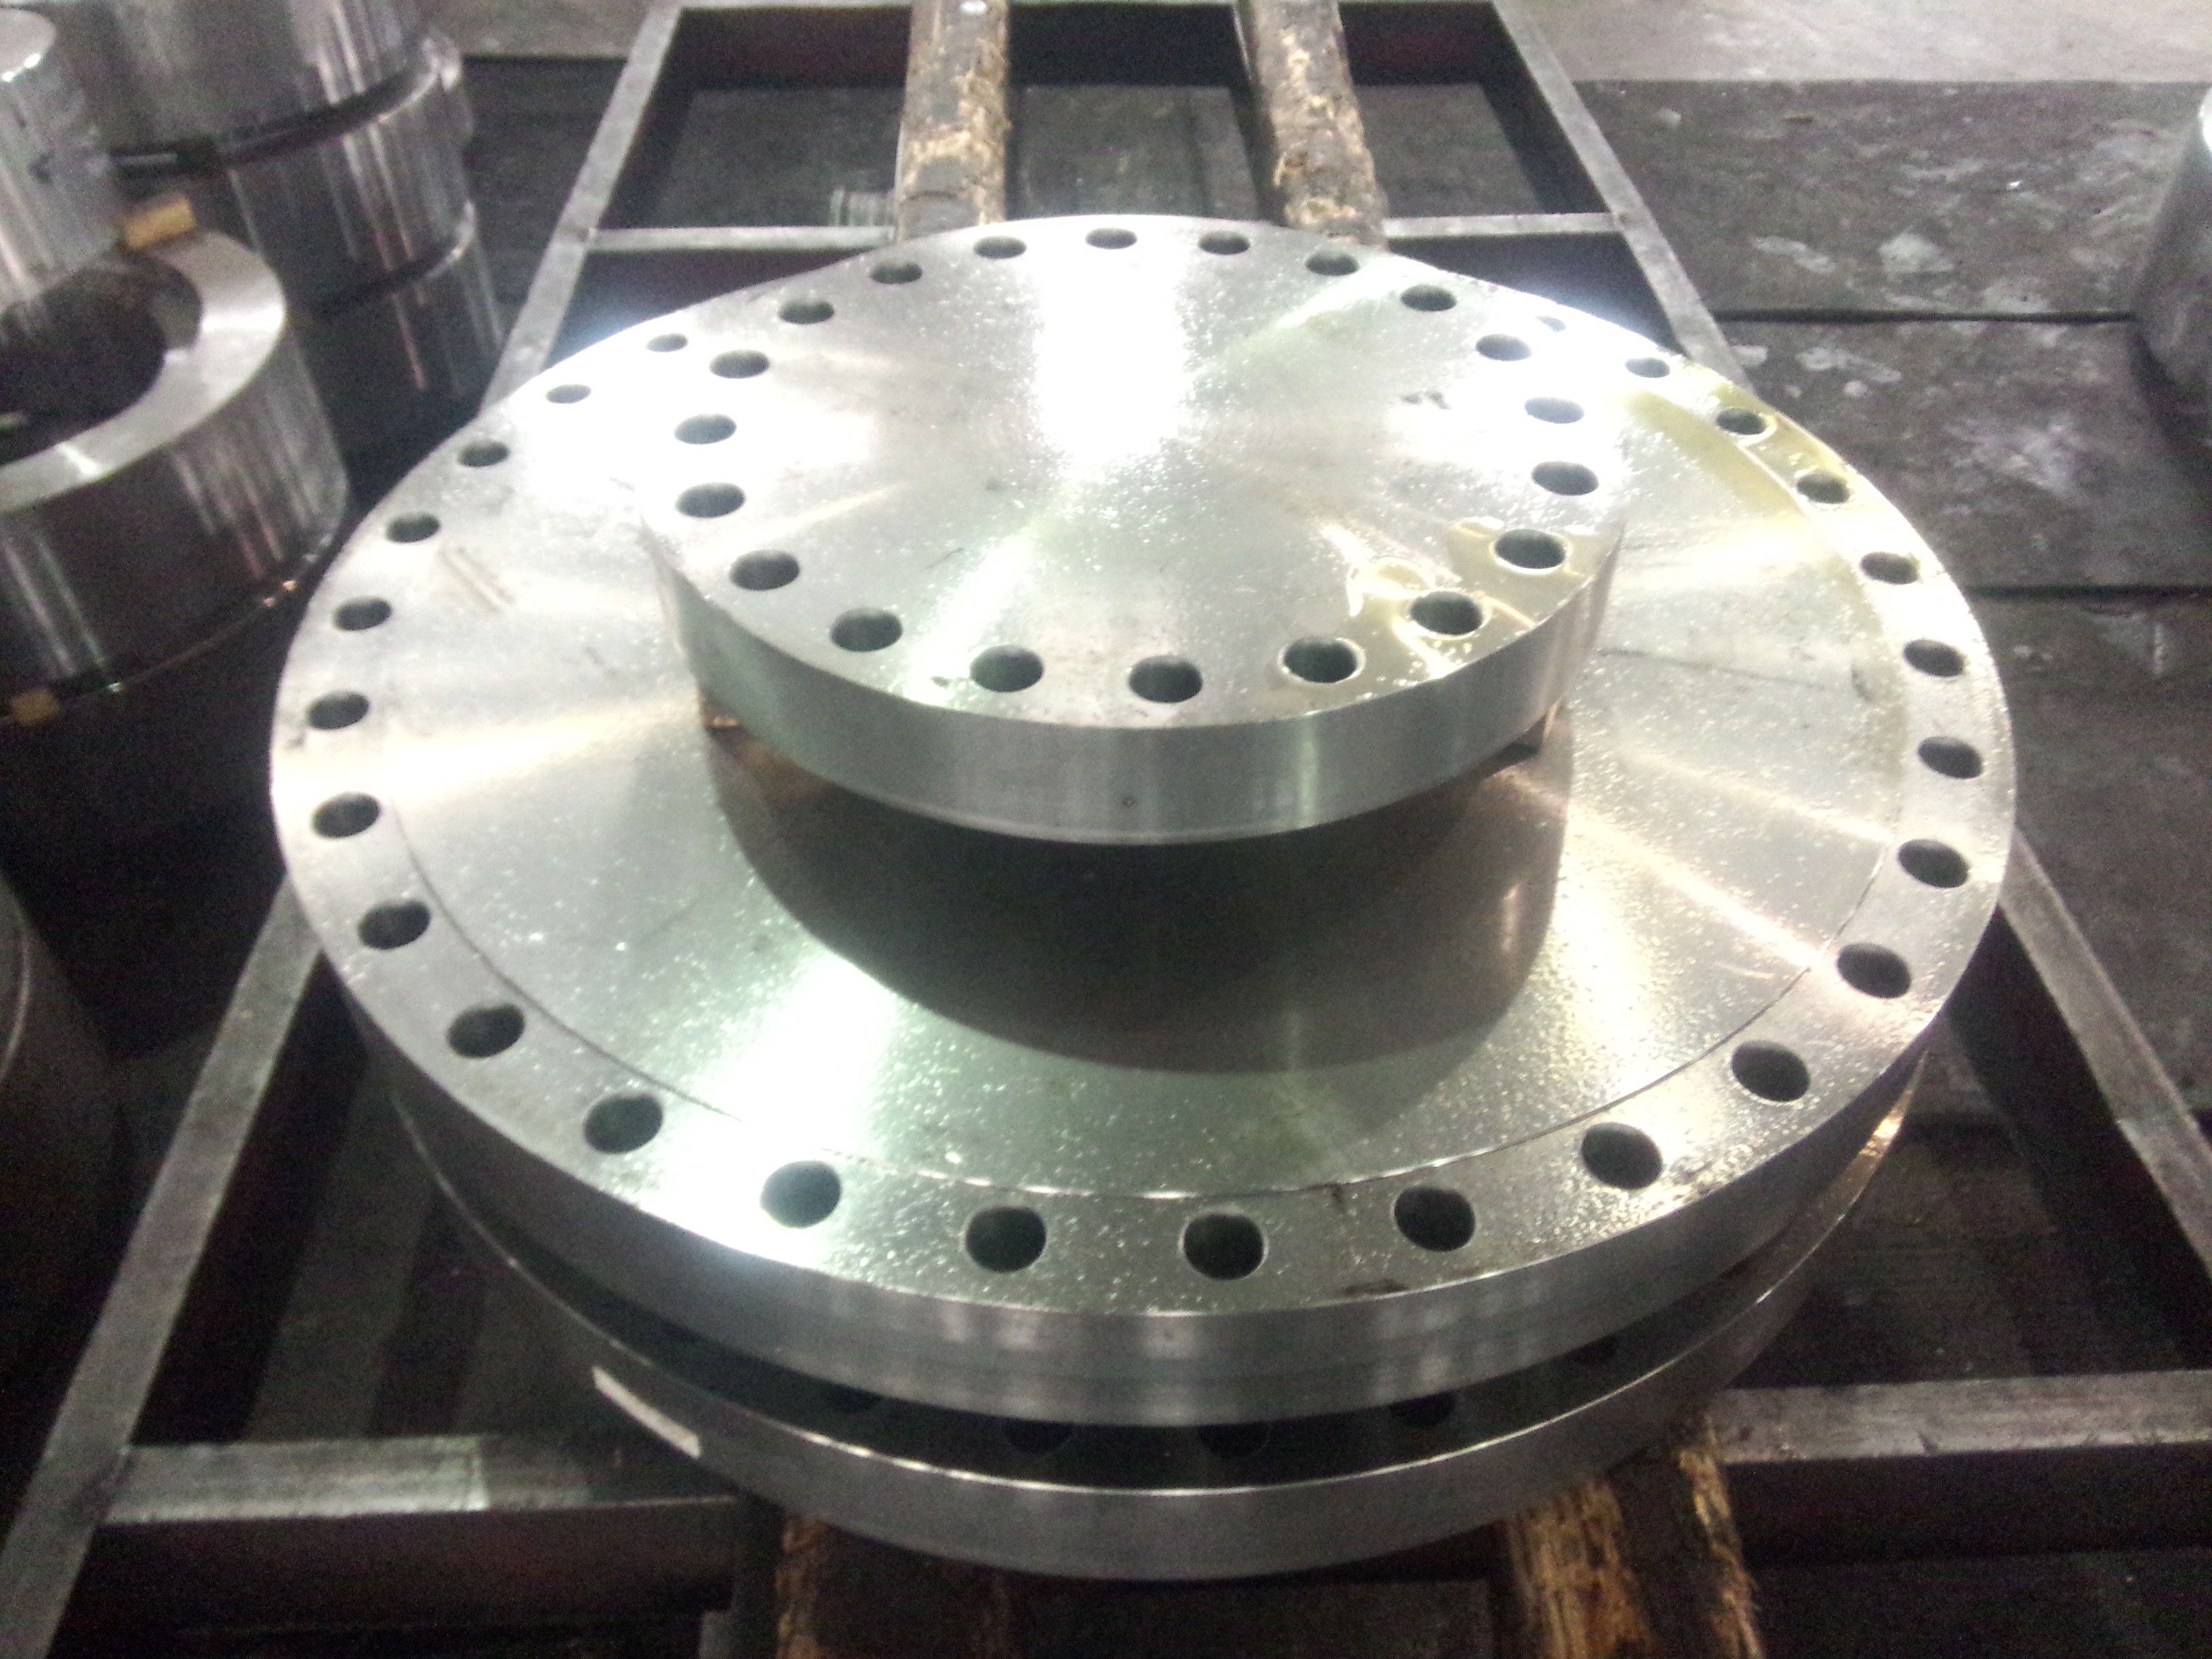 P285NH P285QH Hot Rolled Forged Carbon Steel Flange Finish Mesin PED Sertifikat